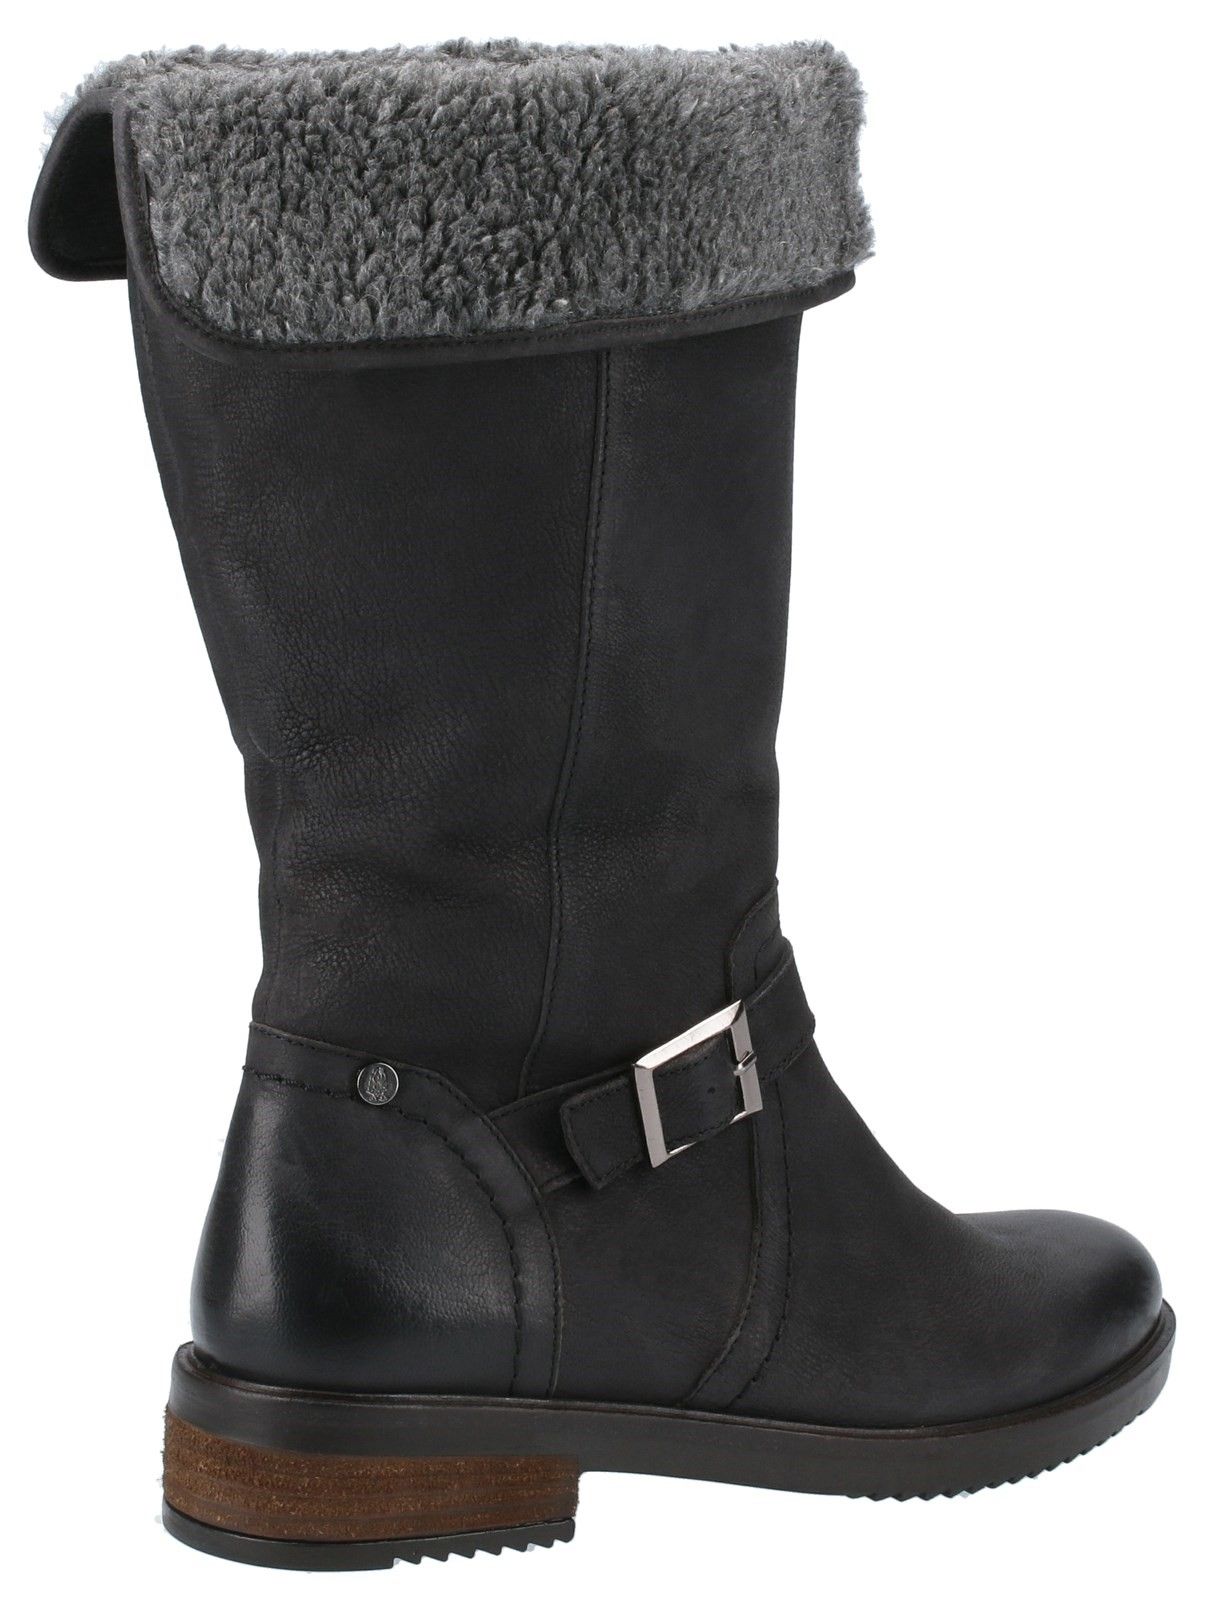 Bonnie is a stylish knee high tumbled leather boot with cosy fleece lining and faux shearling collar. A comfort memory foam leather sock cushions the feat whilst the rubber shark tooth sole gives extra grip.Casual tumbled leather and faux shearling upper. 
Cosy fleece lining with faux shearling collar. 
Cushion comfort memory foam leather sock. 
Functioning inside hidden half zip for ease. 
Flexible and hardwearing TPR unit with leather effect heel and rubber shark tooth sole for extra grip.